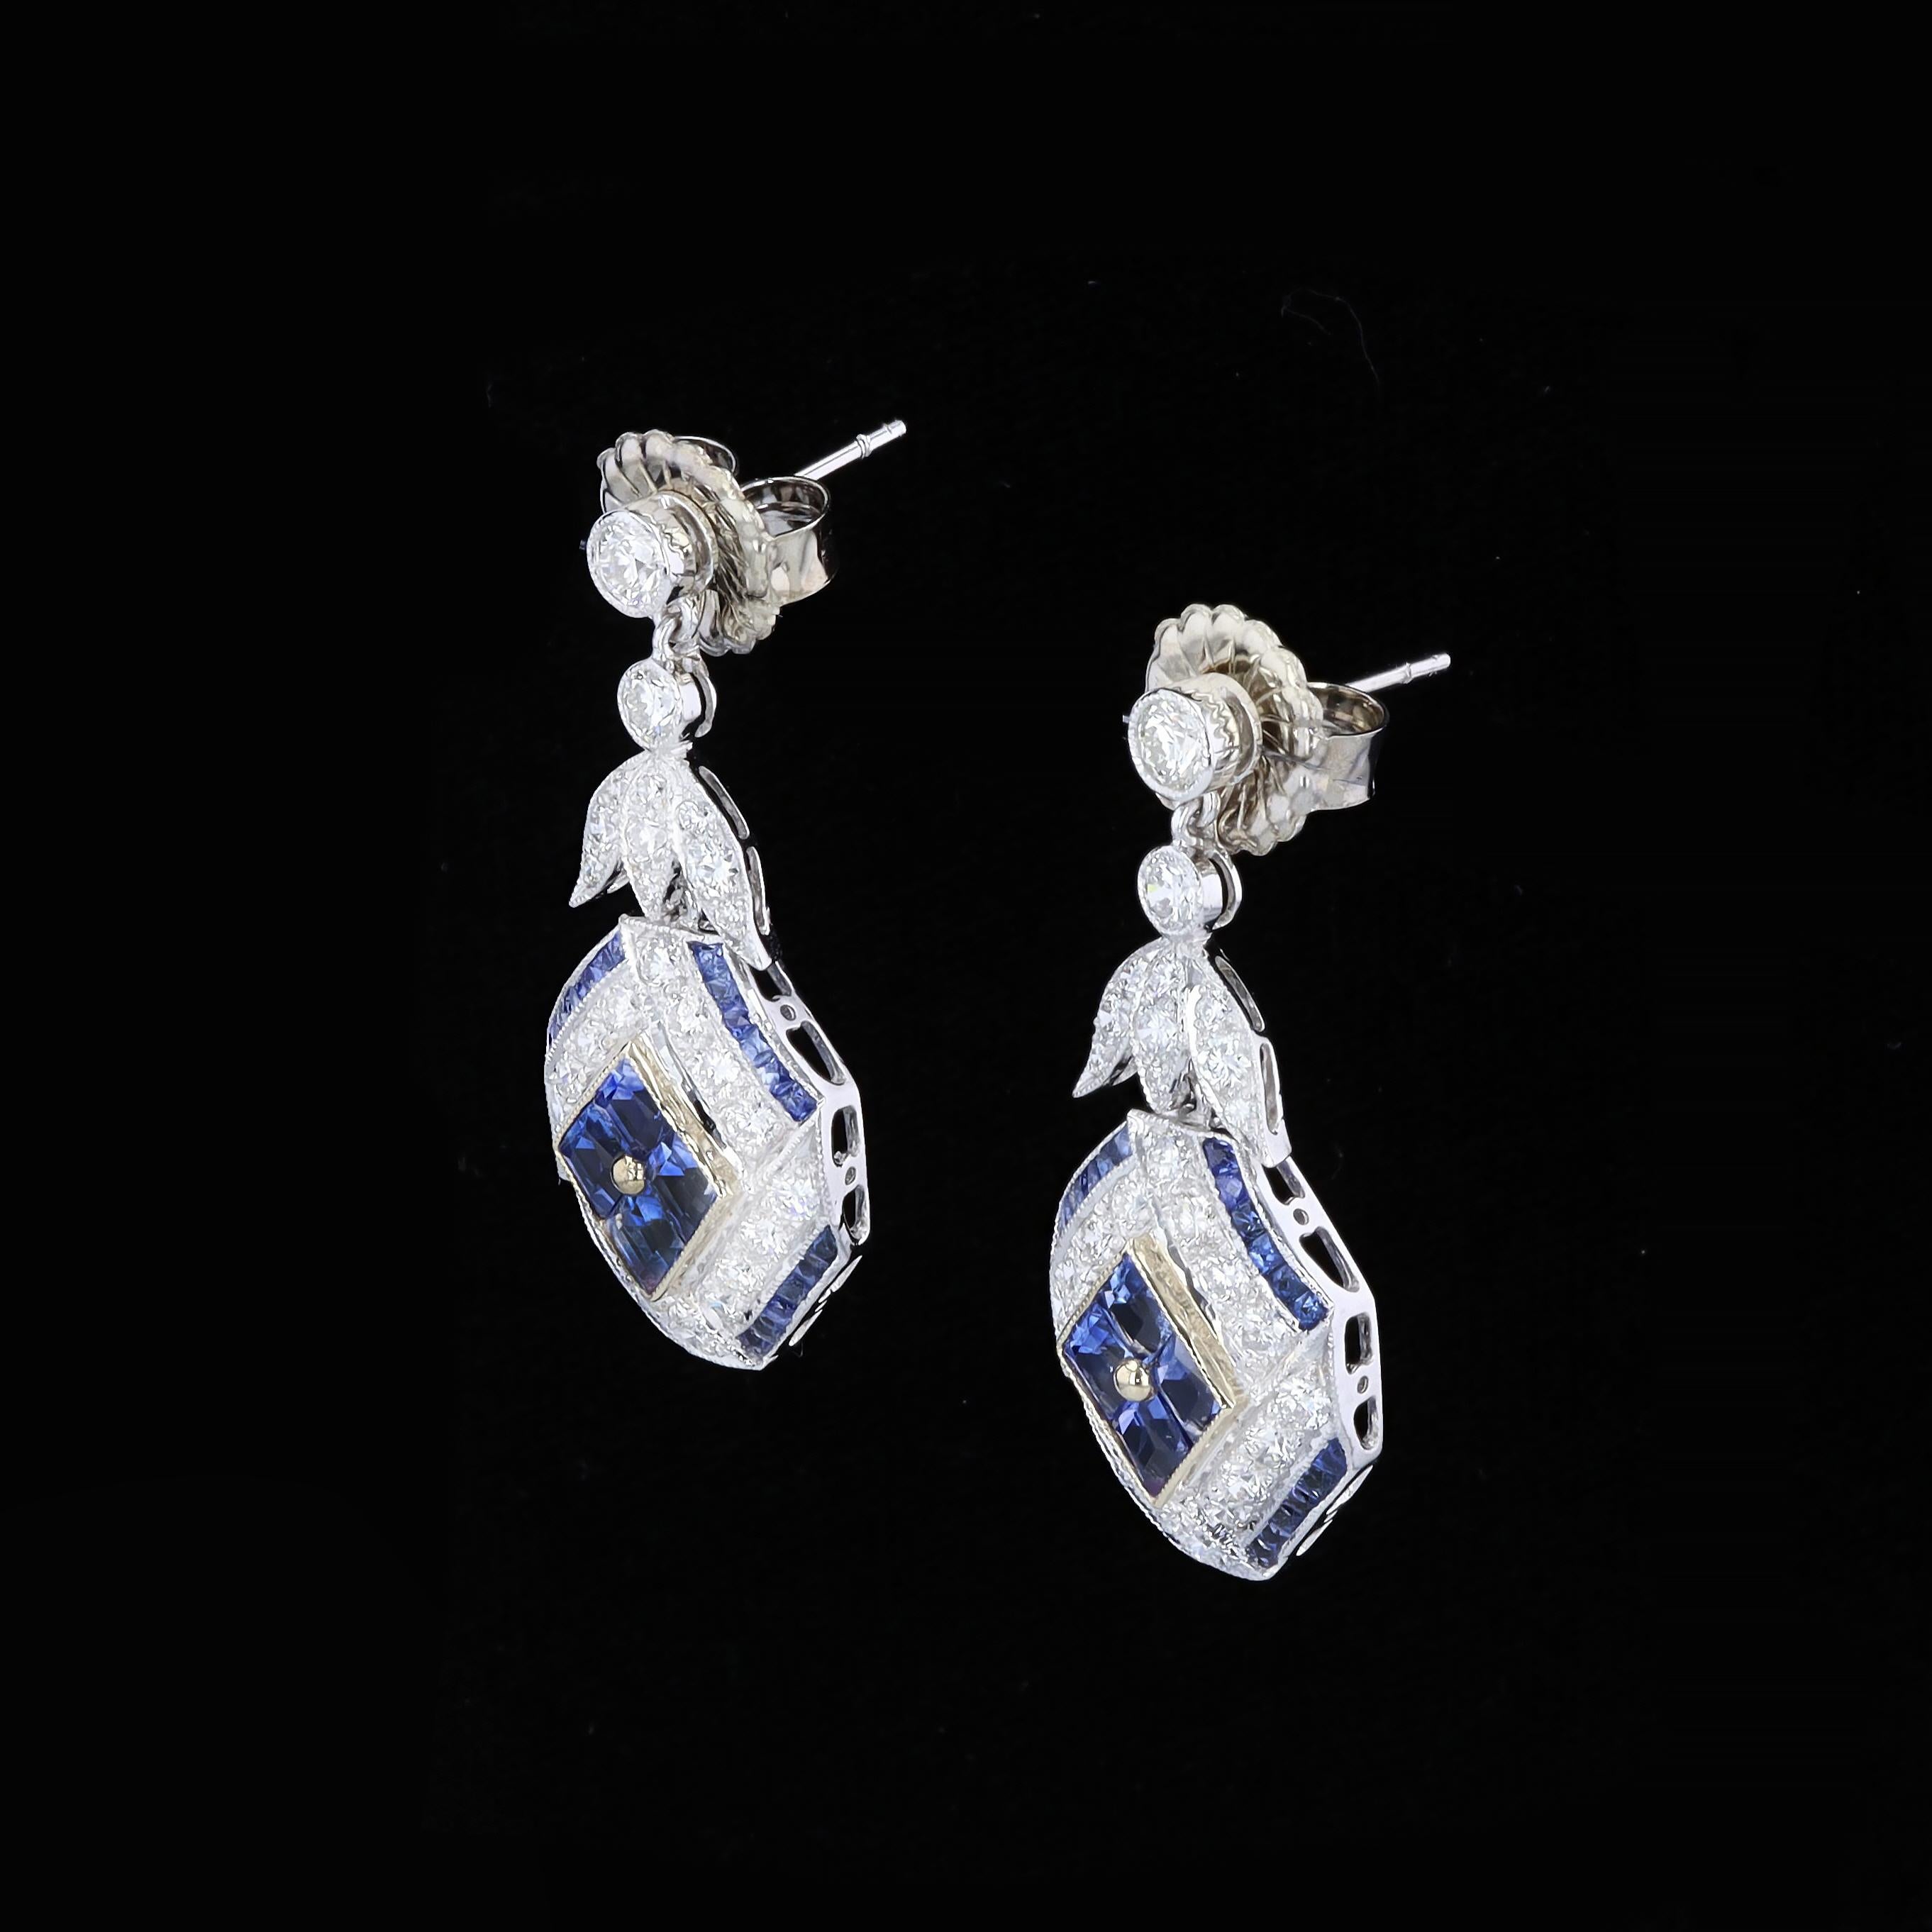 Women's 18K White and Yellow Gold Diamond Earrings with French Cut Sapphires For Sale